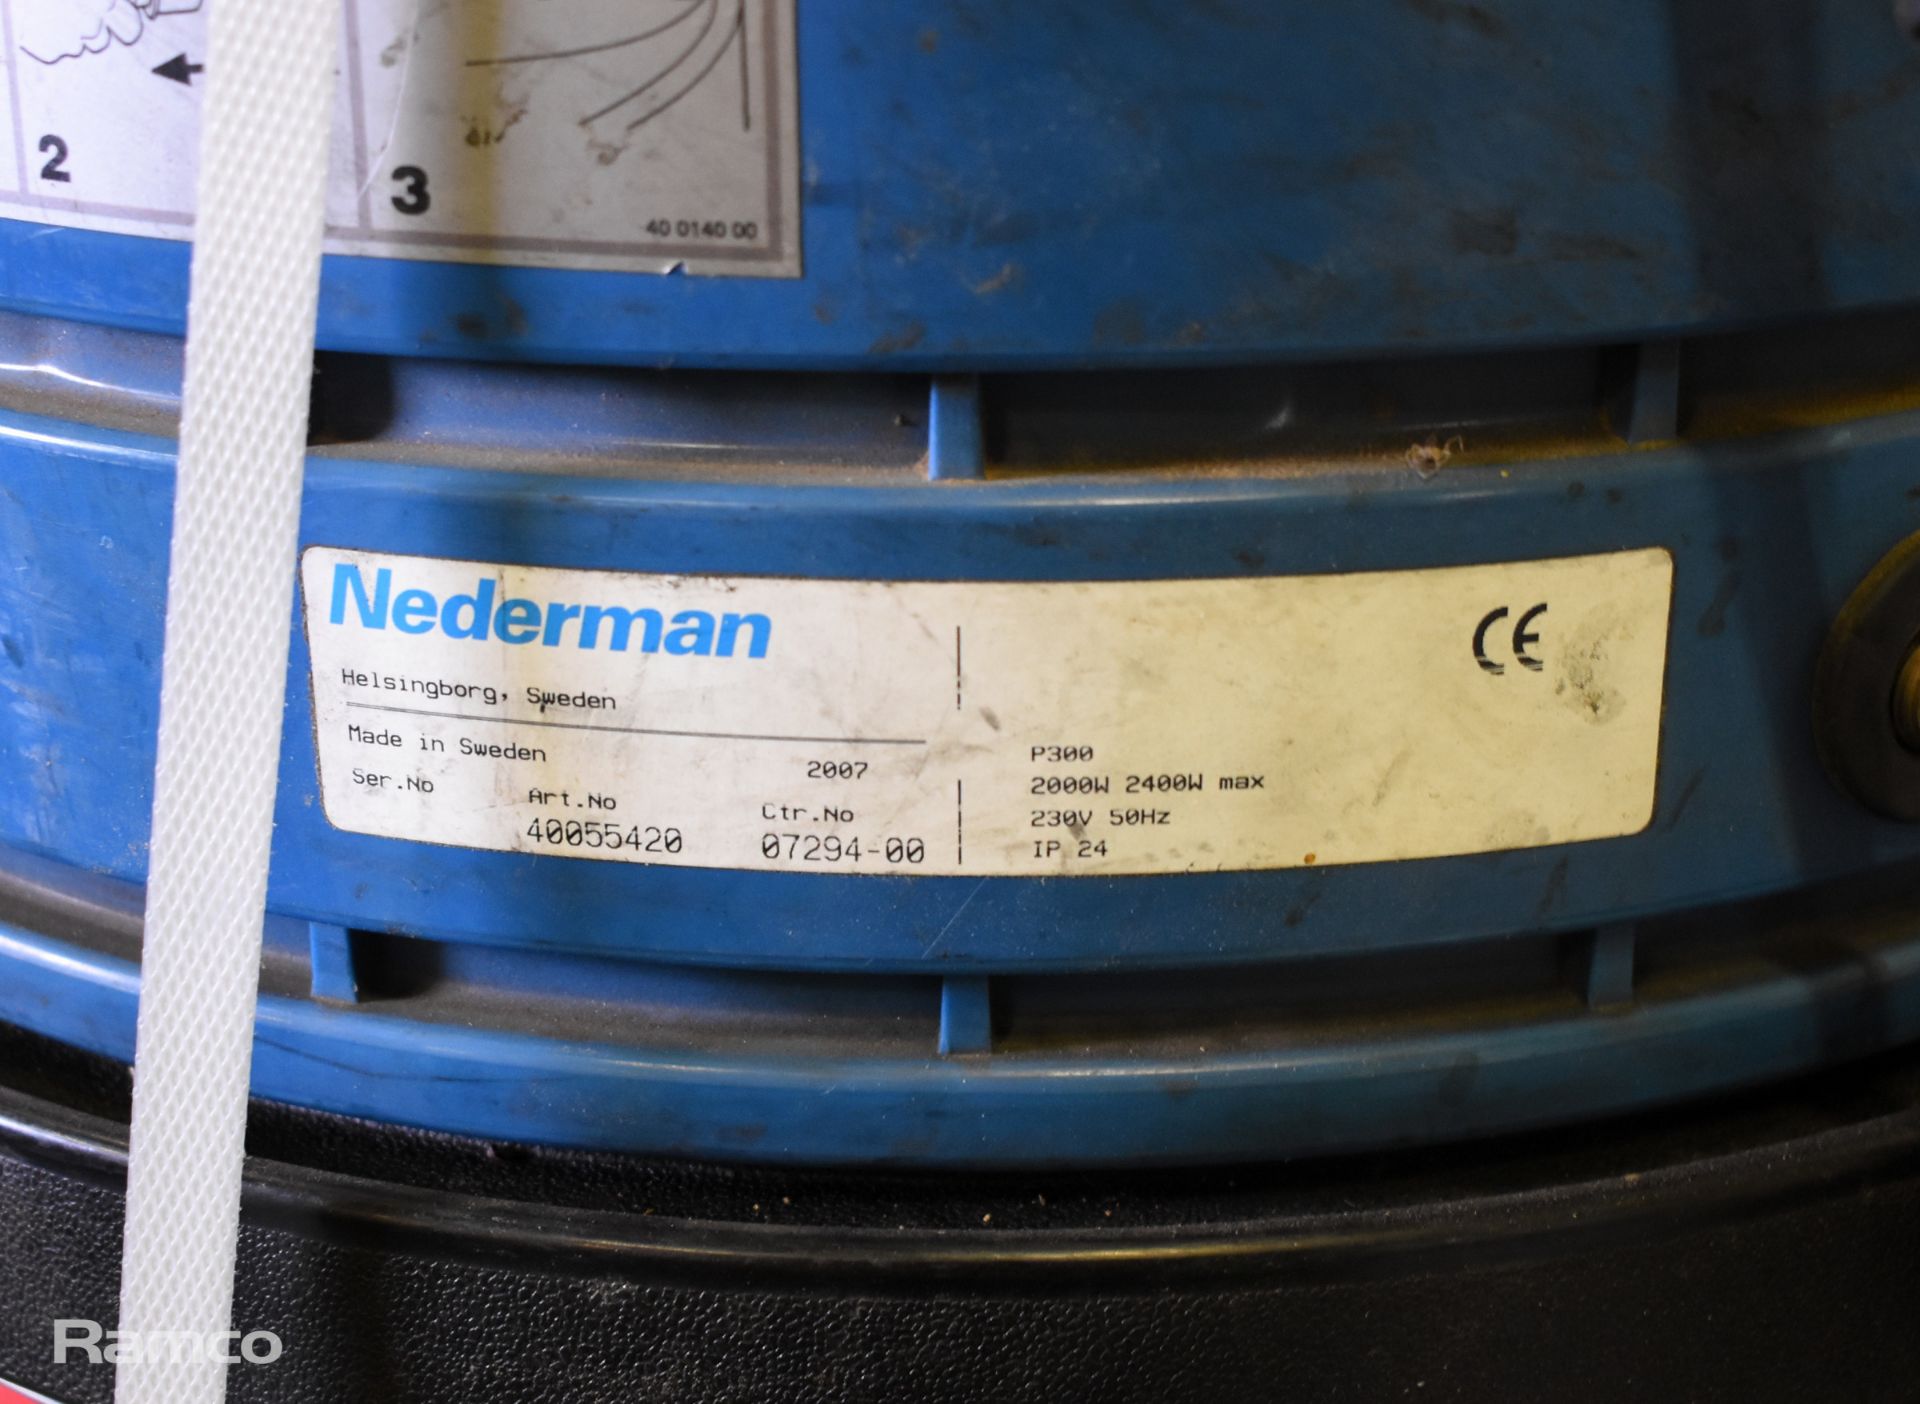 Nederman P300 portable dust extractor - Image 6 of 6